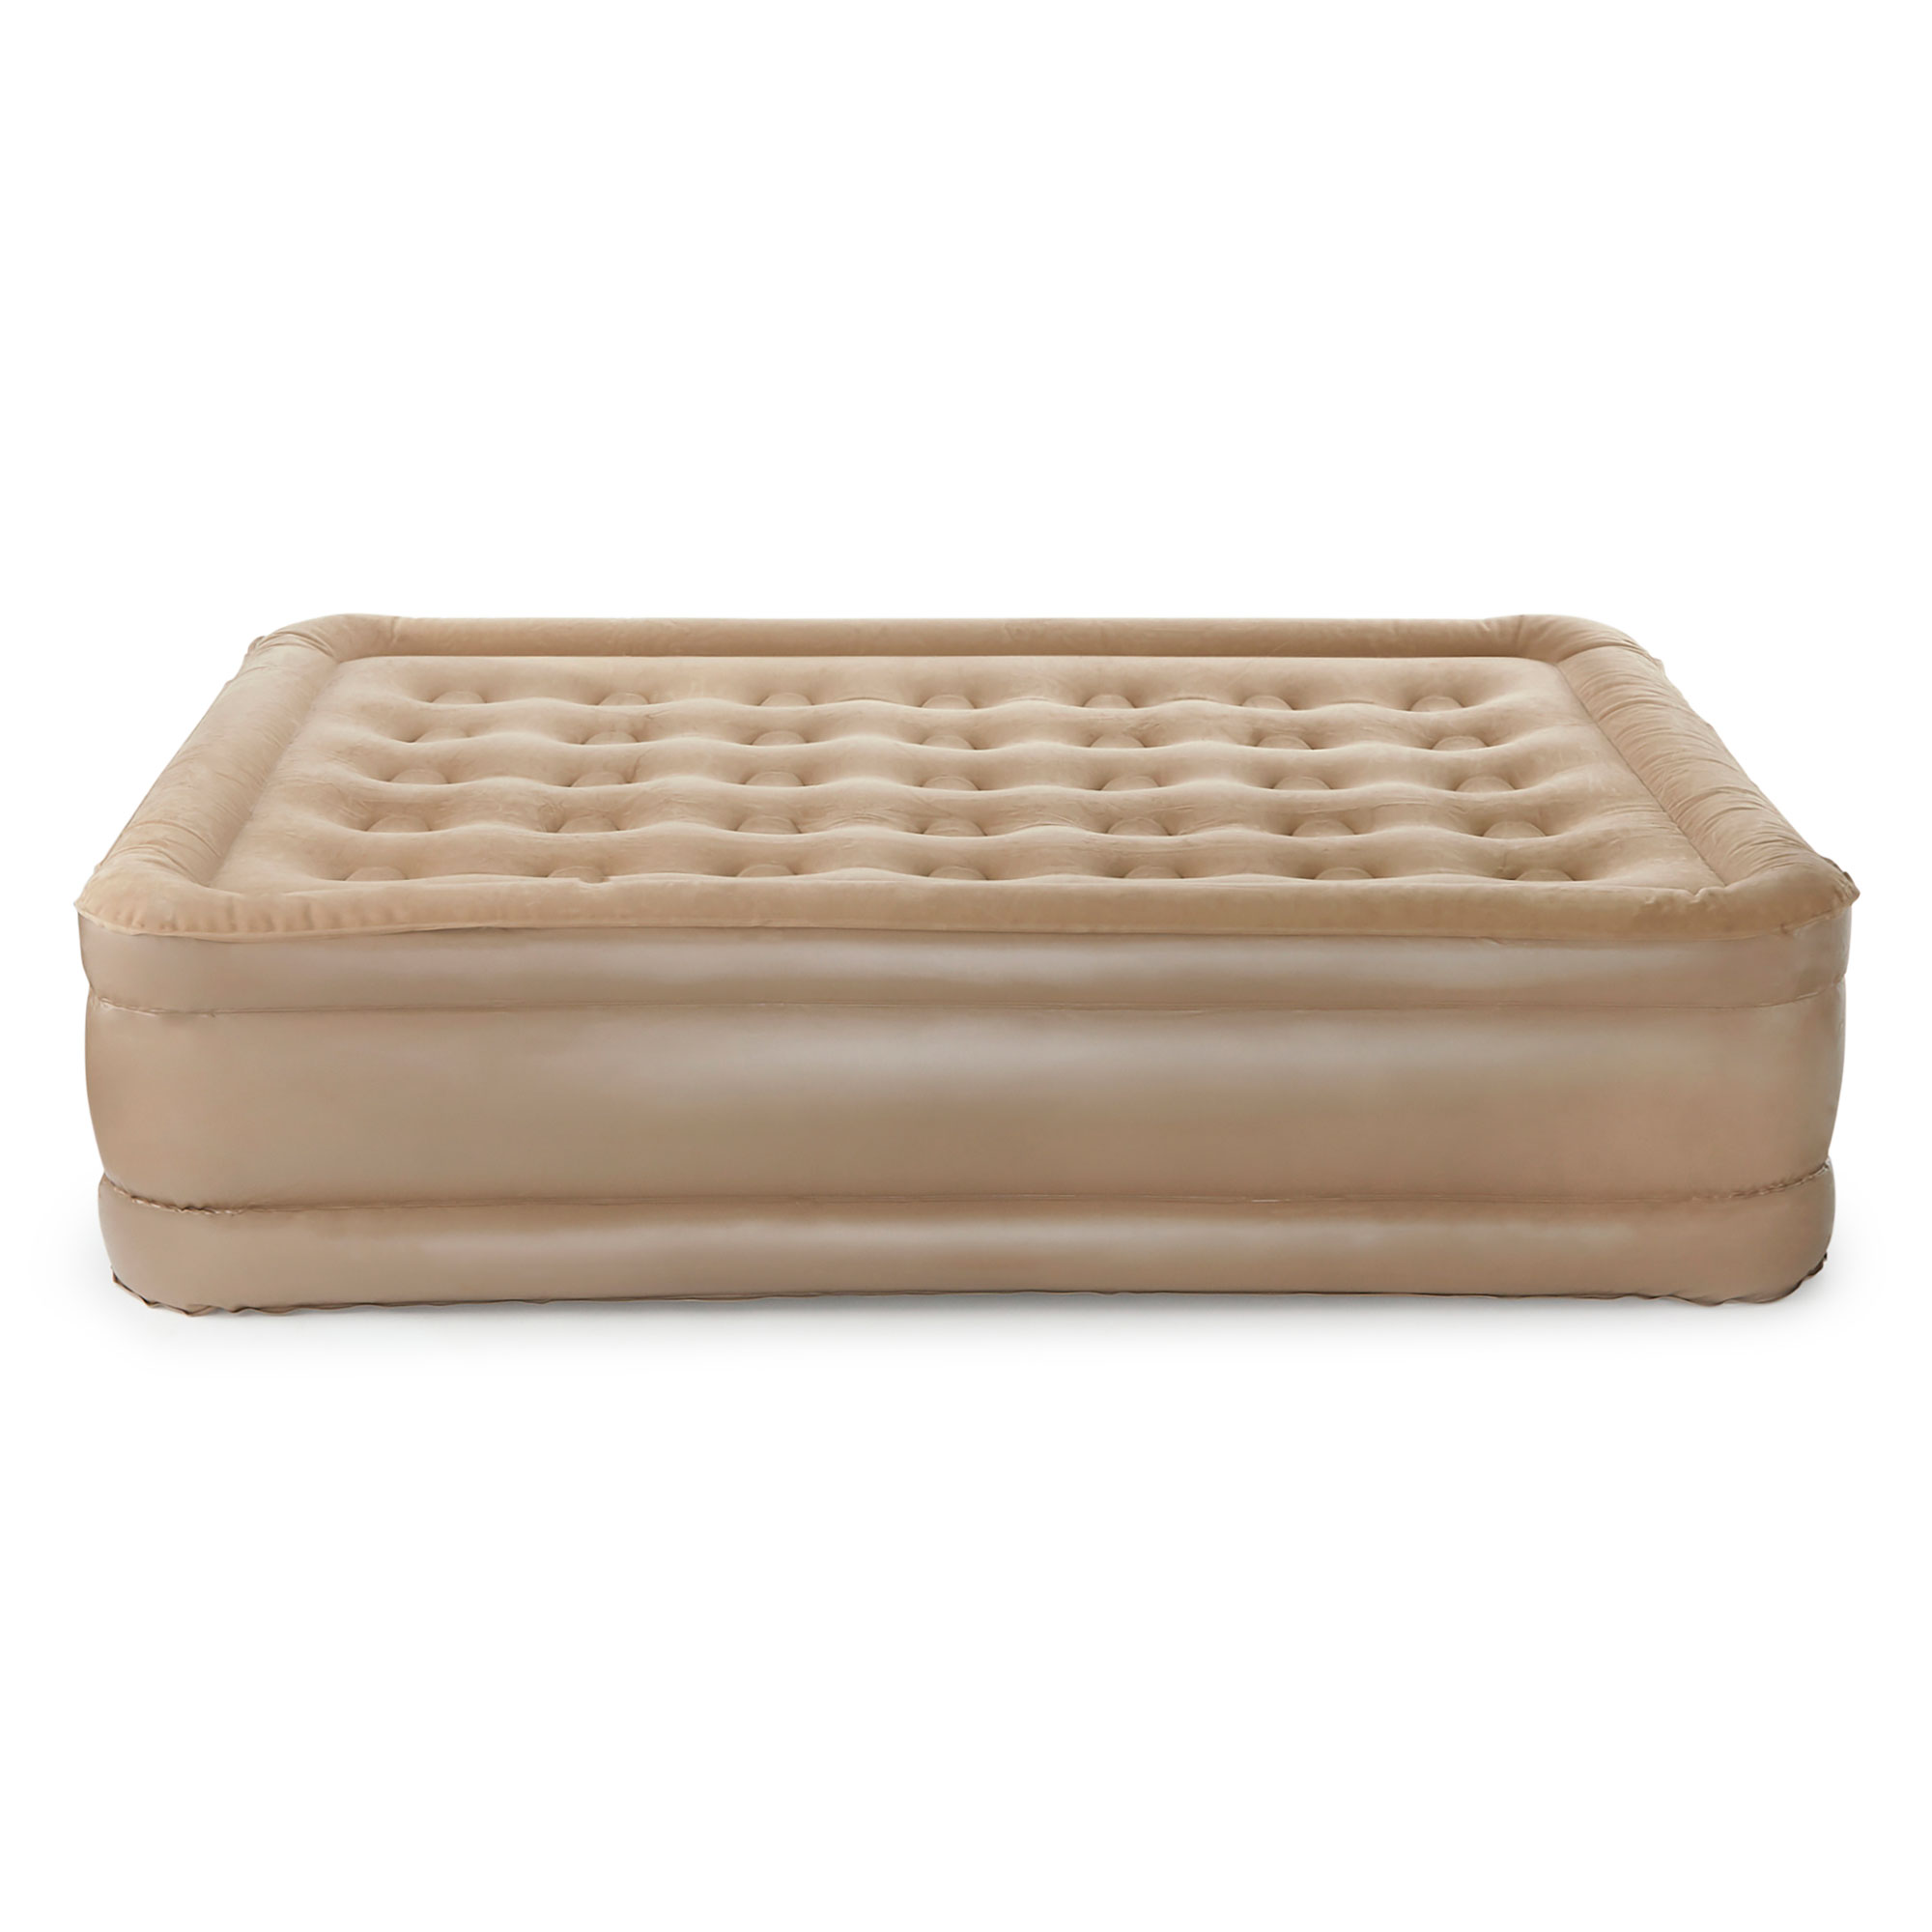 Insta-Bed Raised 18" Inflatable Queen Air Mattress w/ NeverFlat Pump, Beige - image 3 of 11